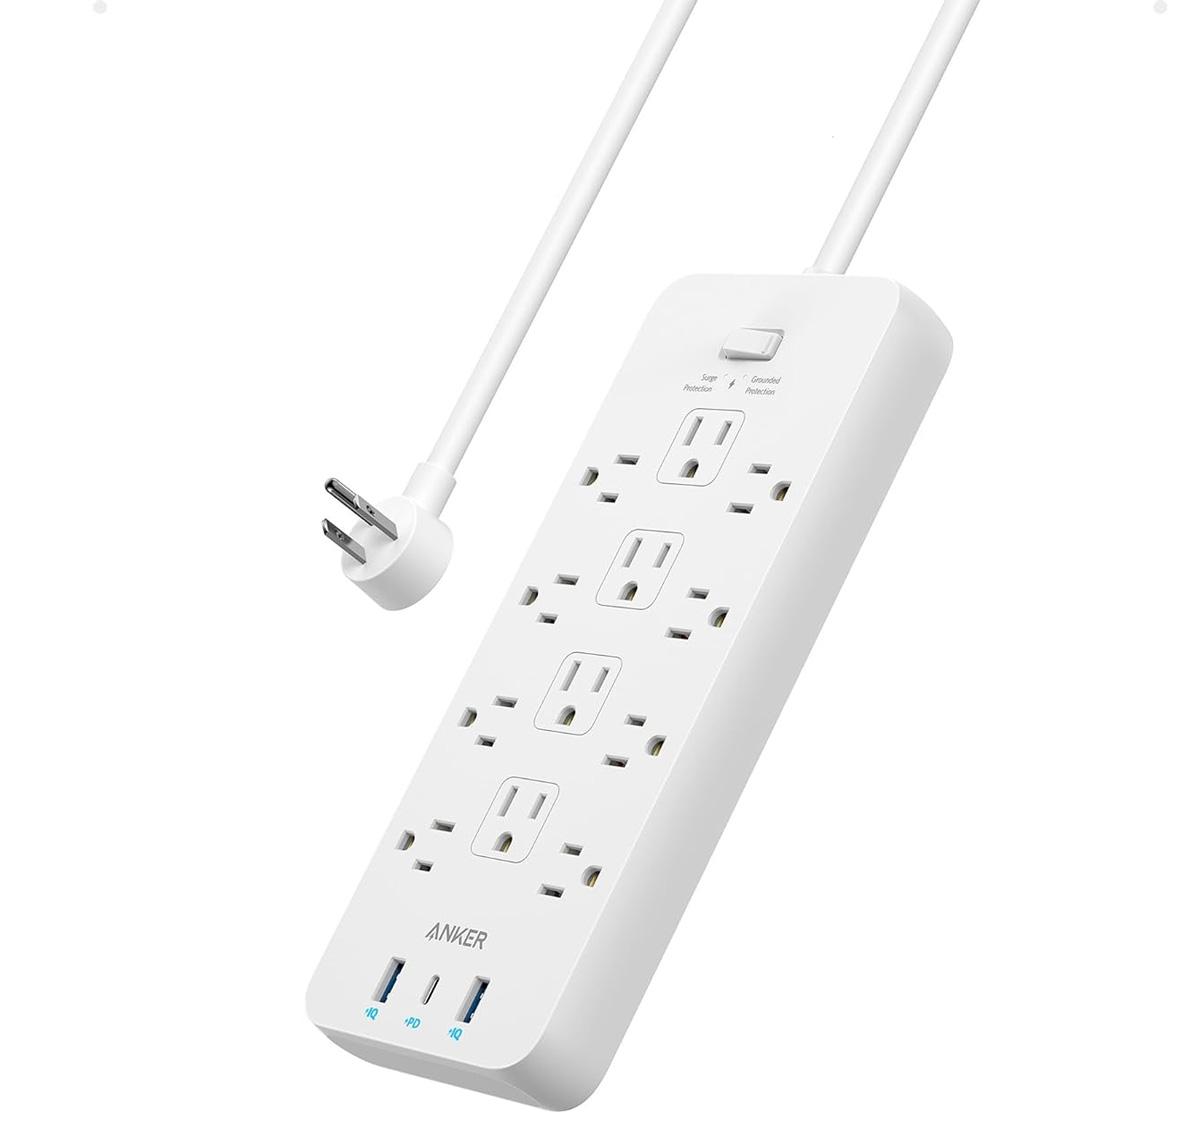 Anker Surge Protector Power Strip with 12 Outlets for $26.99 Shipped